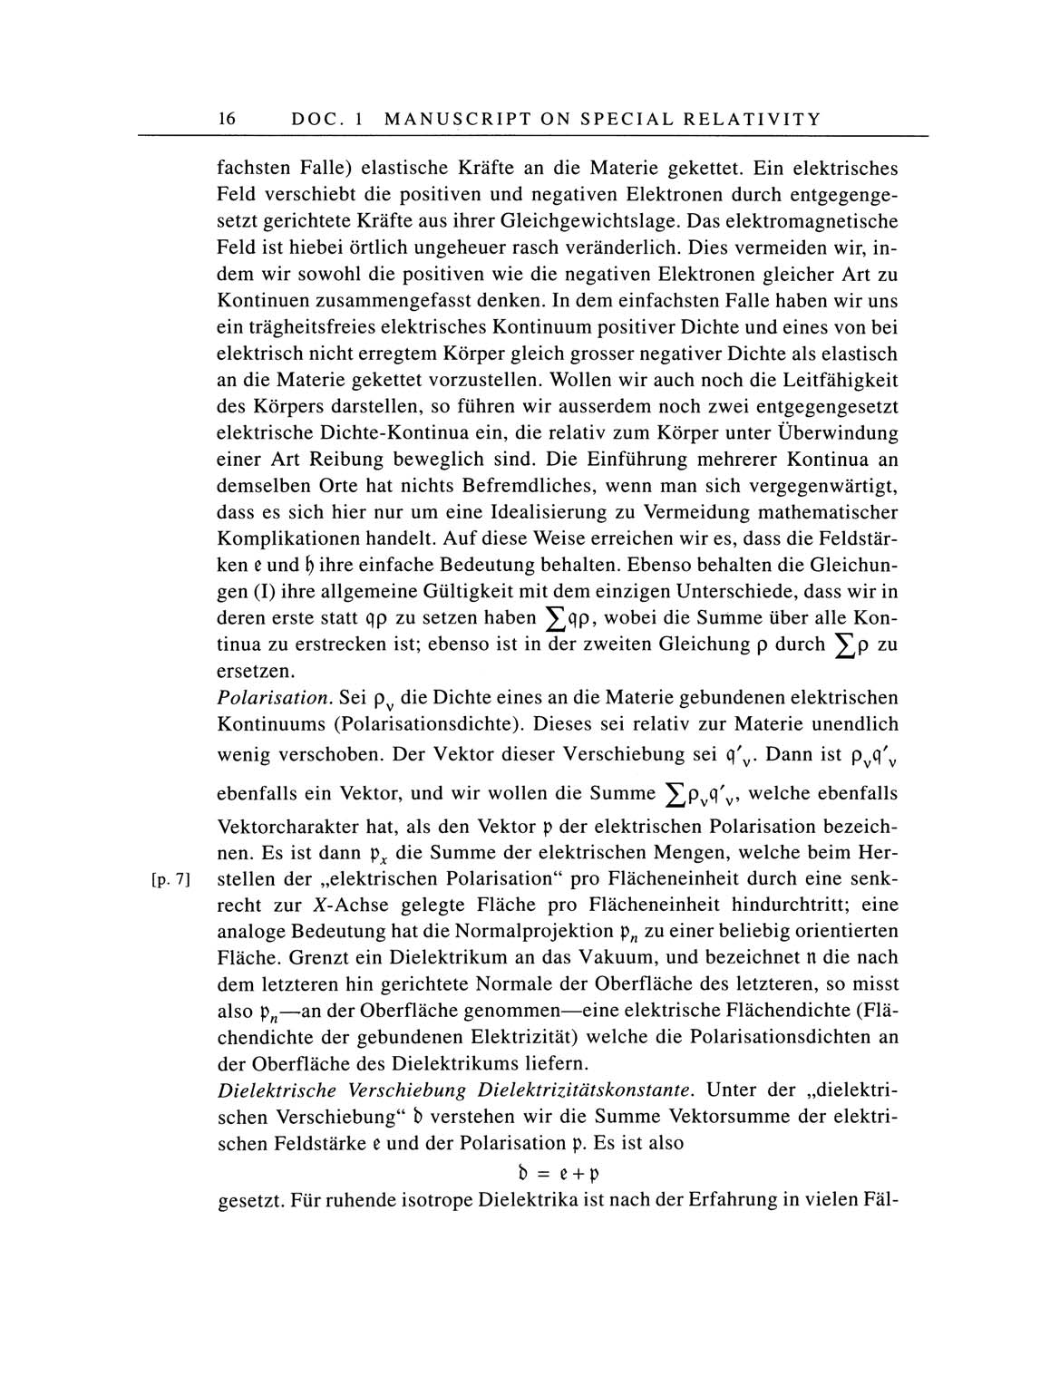 Volume 4: The Swiss Years: Writings 1912-1914 page 16